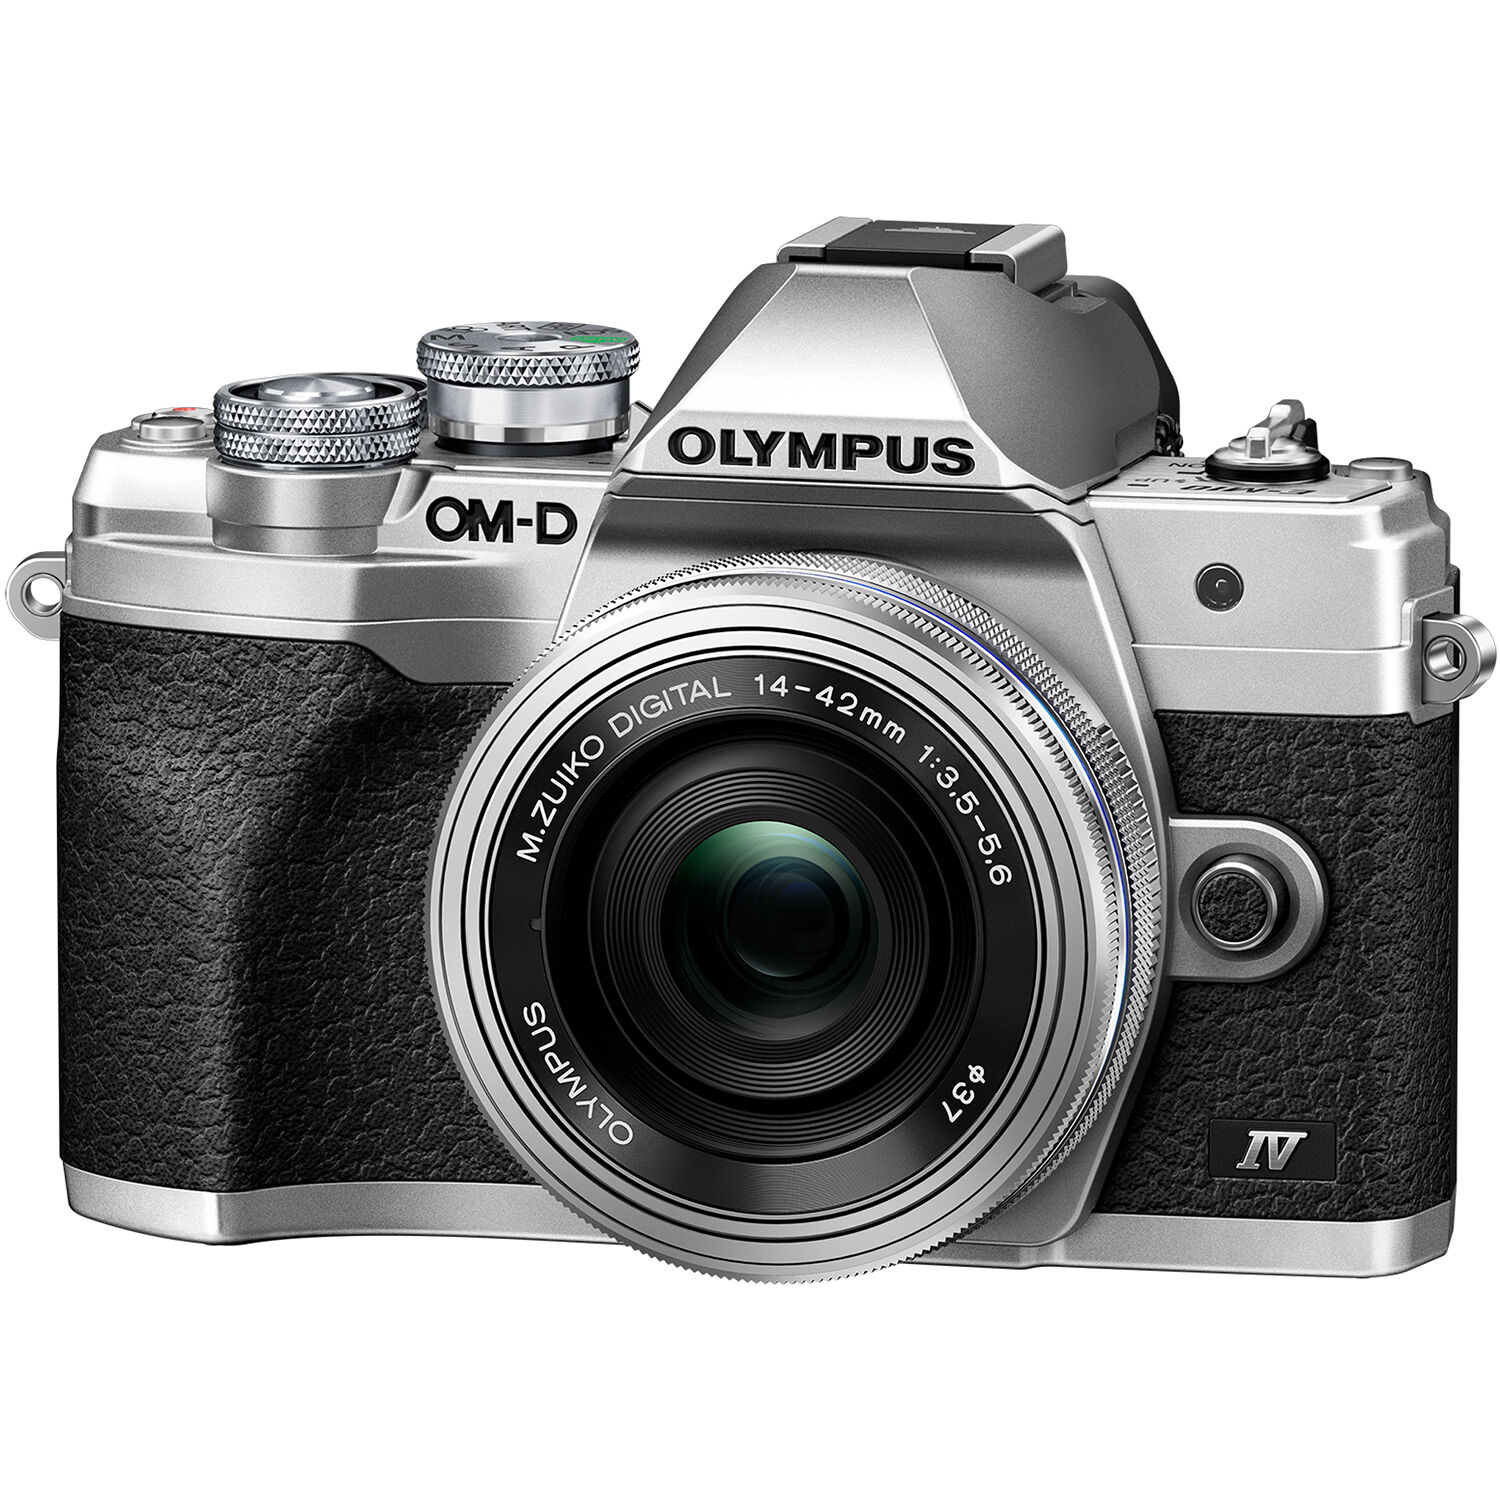 Olympus OM-D E-M10 Mark IV - Feature Rich